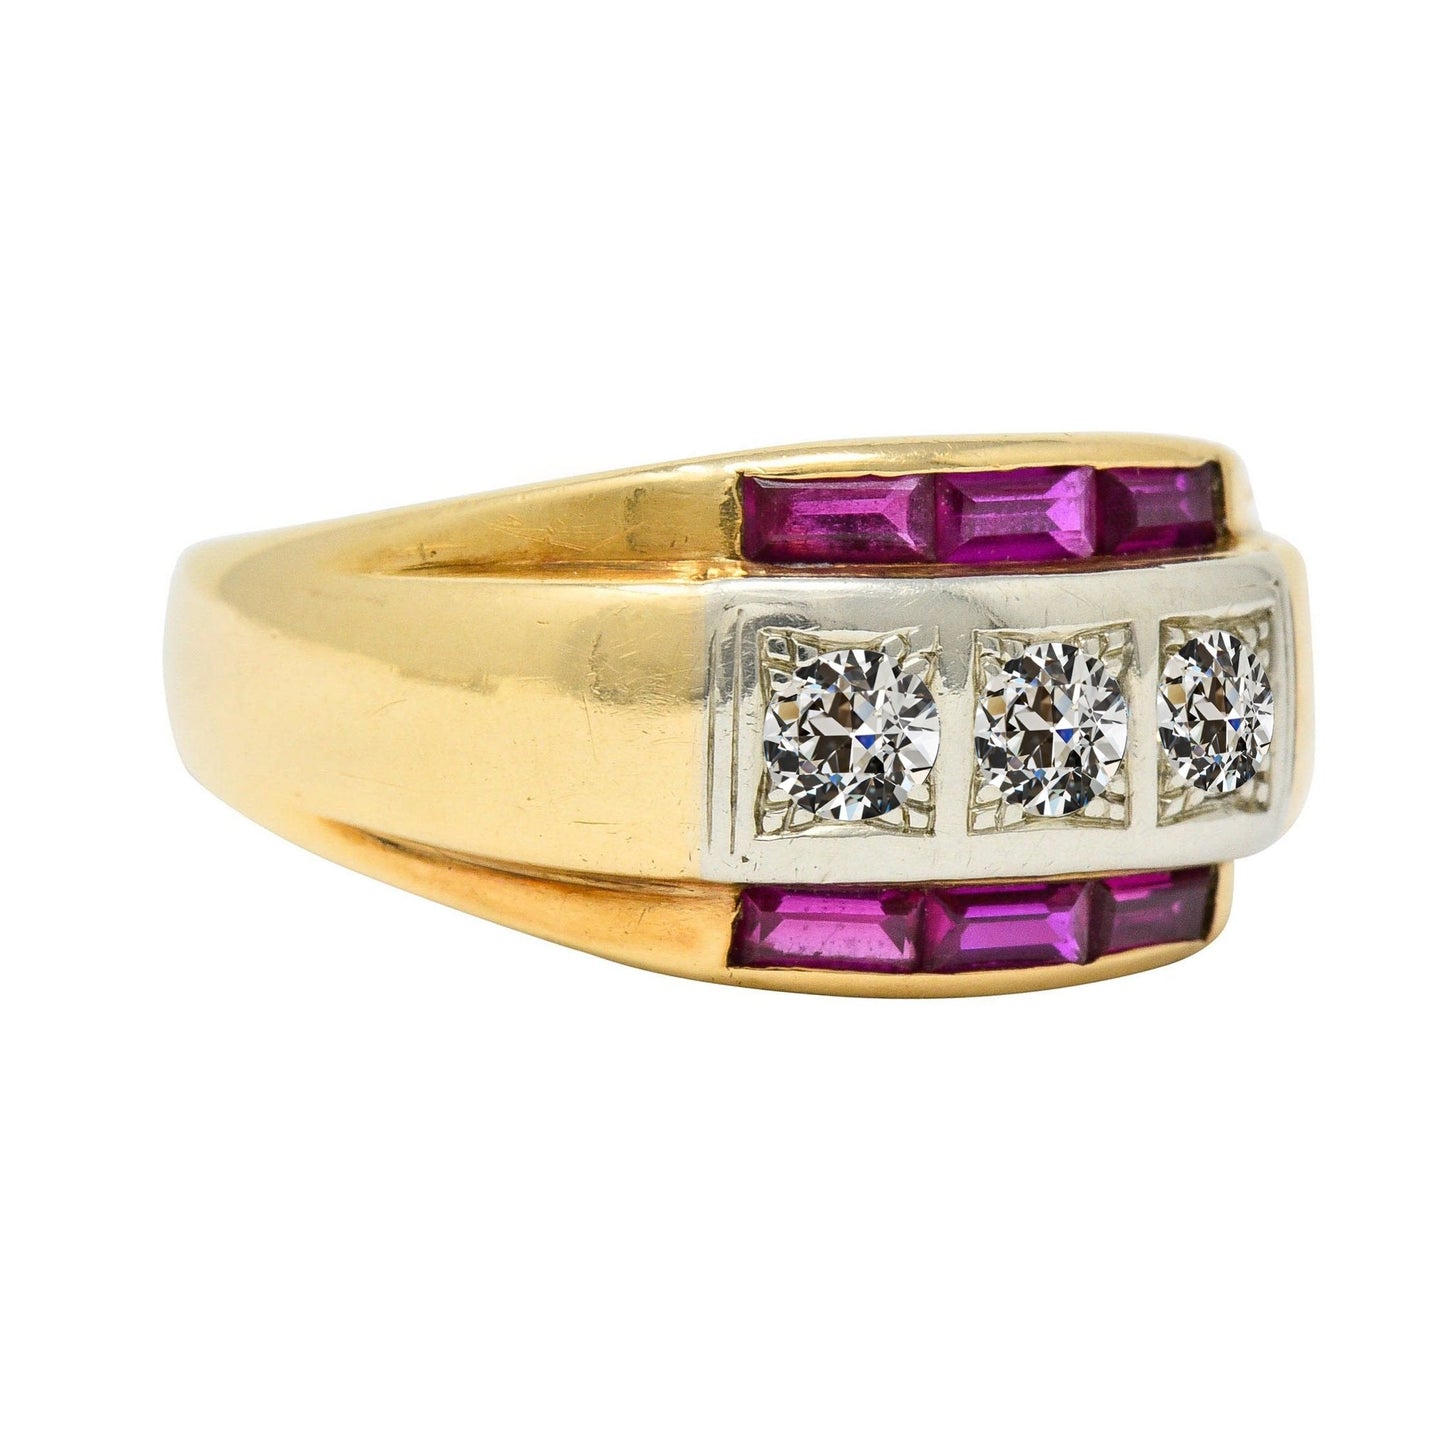 Round Old Cut Diamond Ring With Baguette Pink Sapphires 4.25 Carats